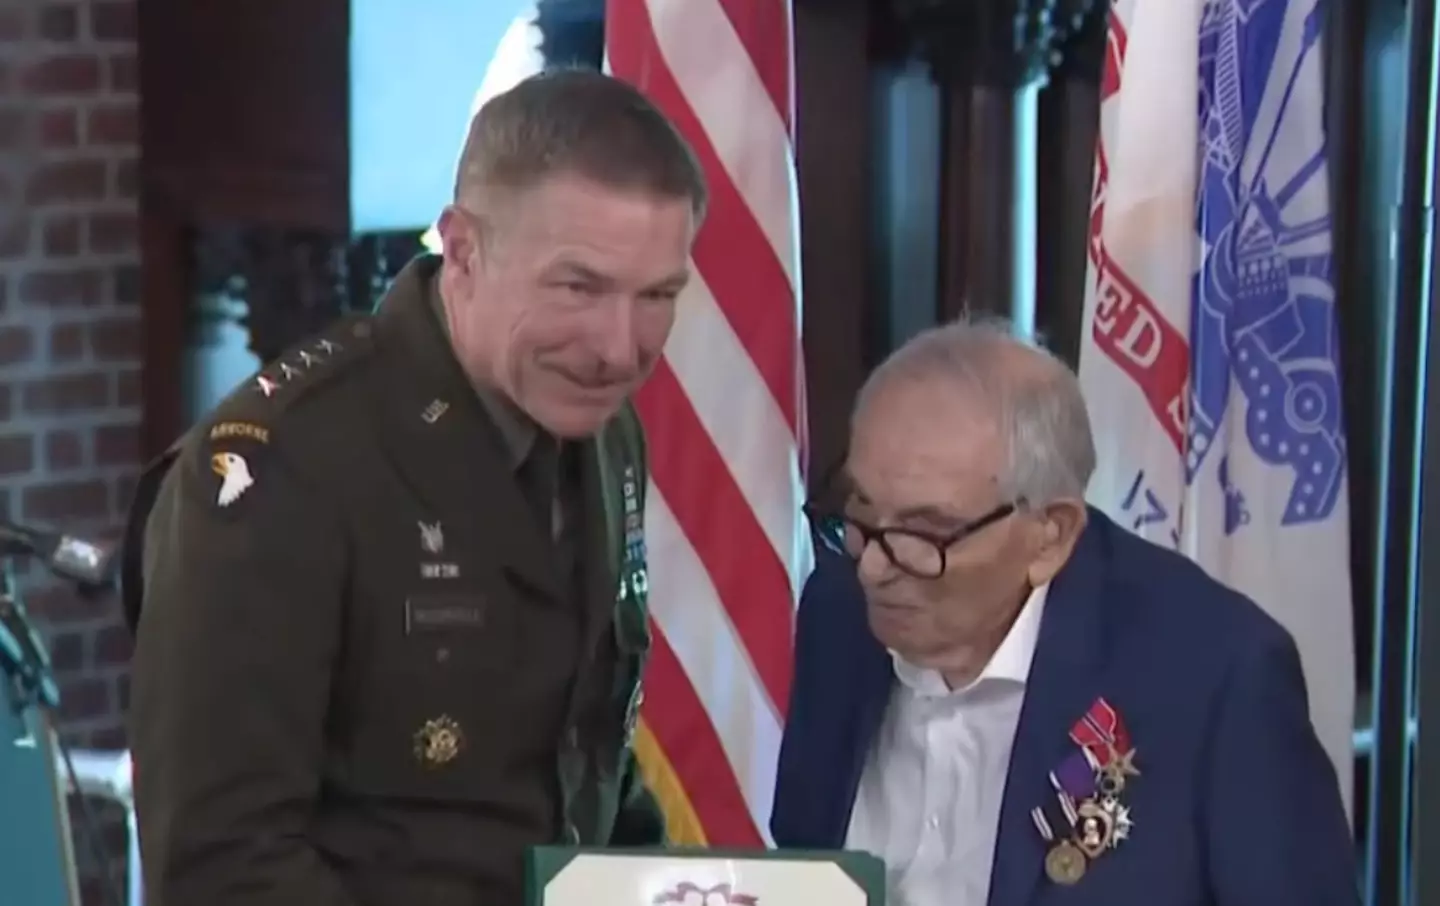 Kellerman finally received his medals after nearly 80 years.